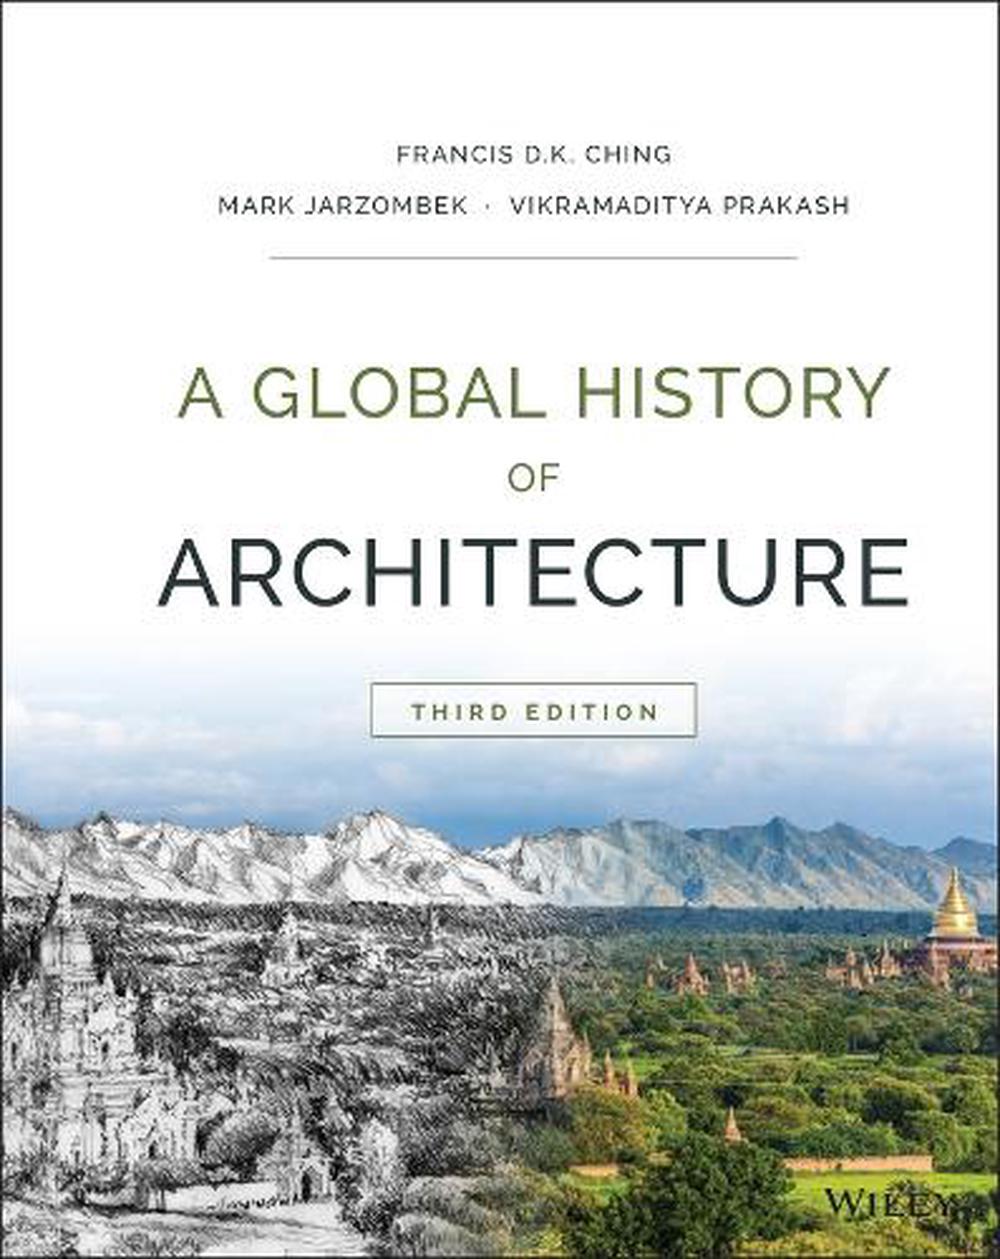 by　Hardcover,　online　Nile　of　Francis　at　Ching,　Buy　1st　Architecture,　9781118981337　Edition　The　Global　History